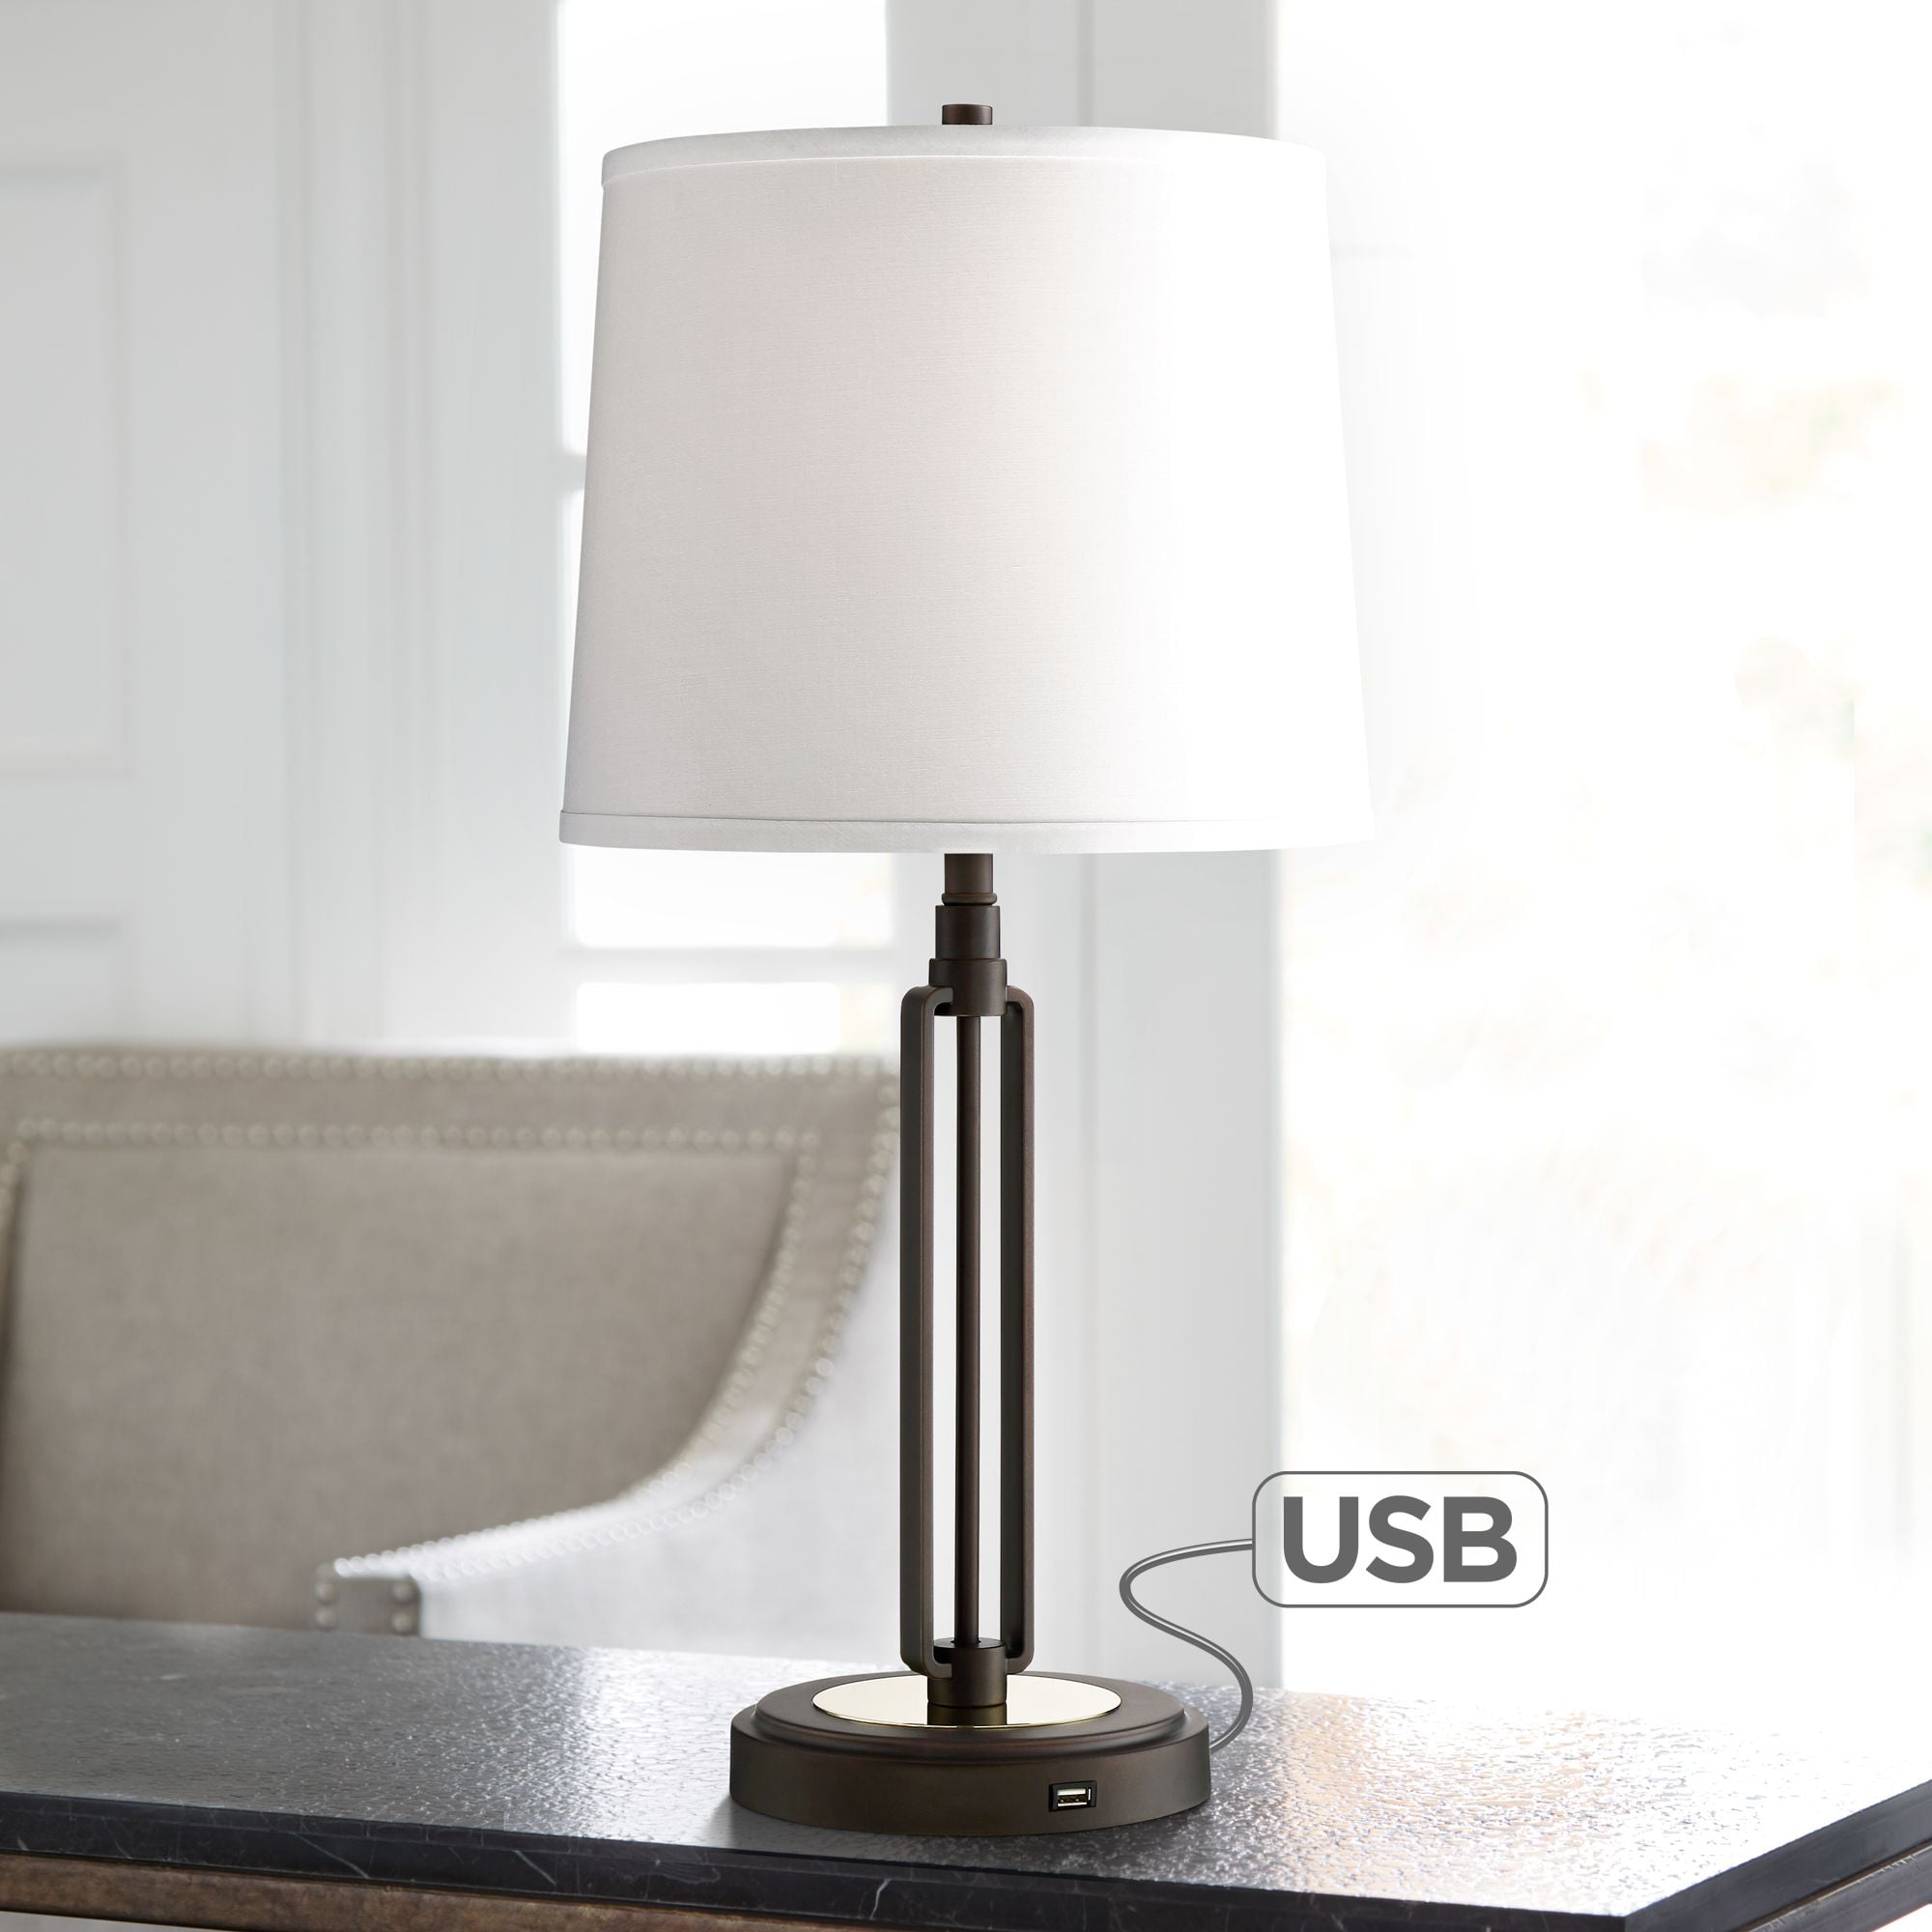 Franklin Iron Works Industrial Table, Franklin Iron Works Industrial Table Lamp With Usb Port Ikea